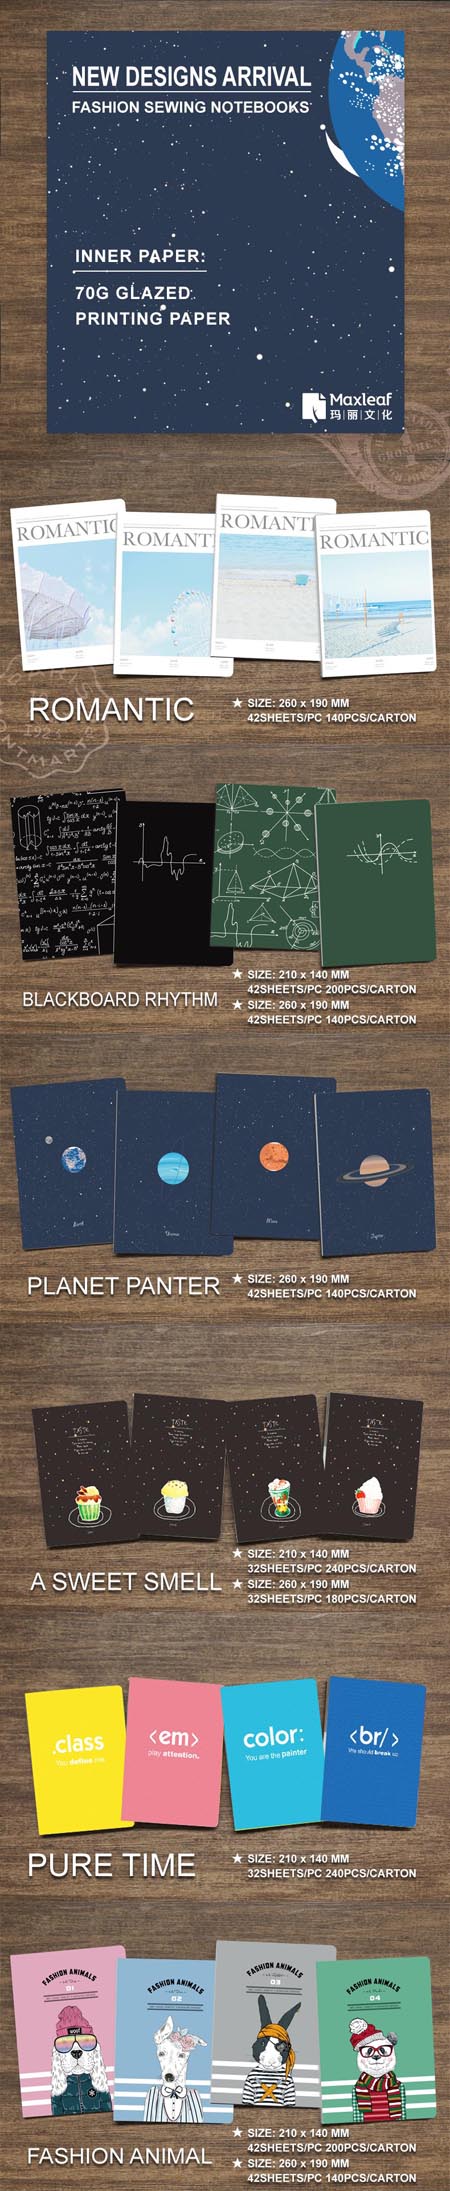 Hotsale Notebook Soft Cover Diary Exercise Book Hot Sale Promotional